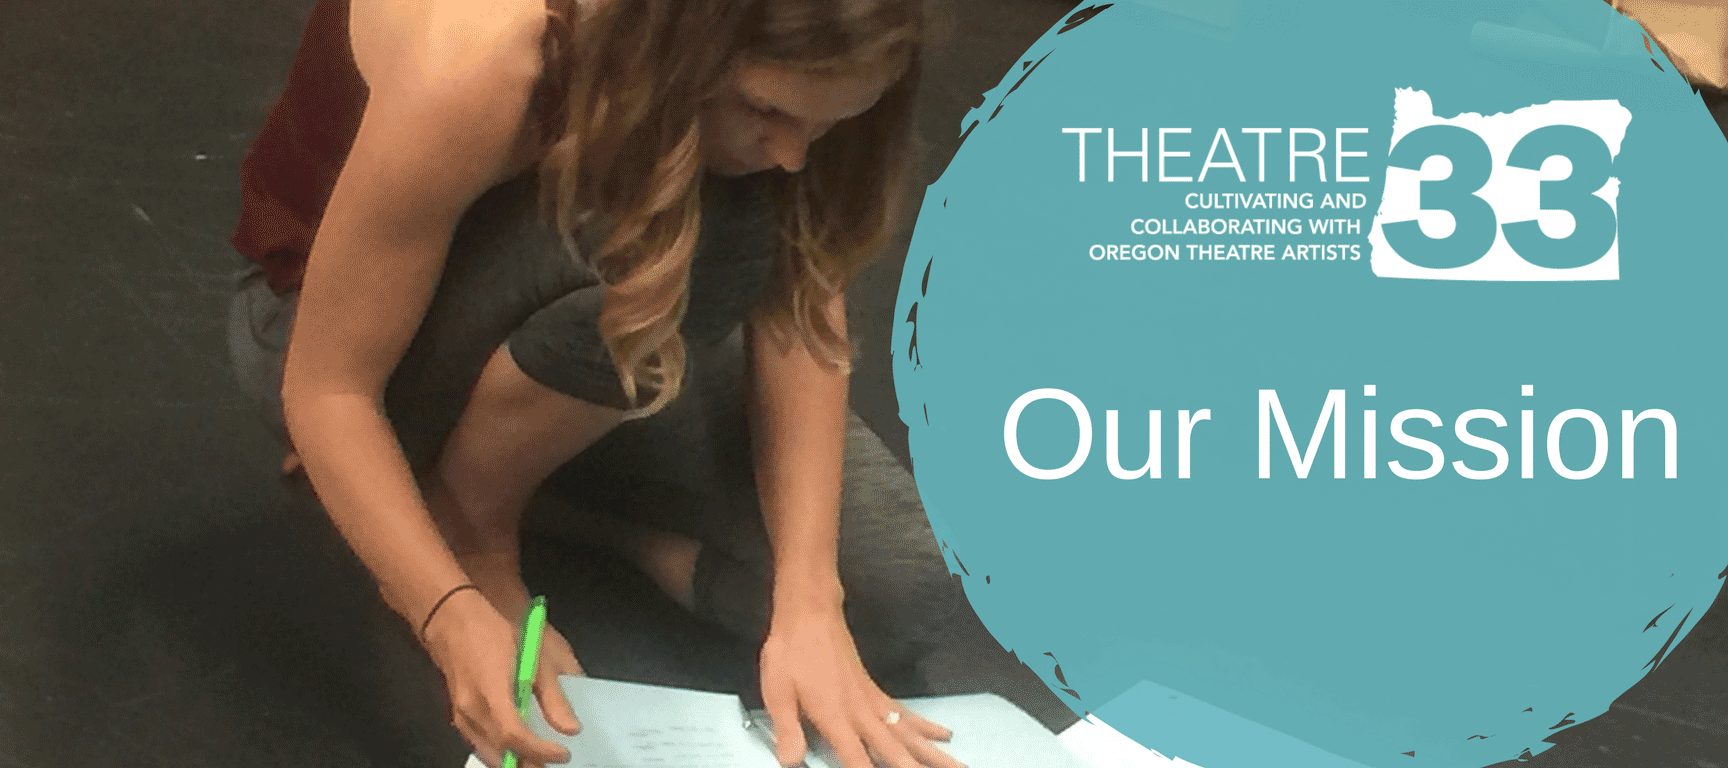 Our mission at Theatre 33